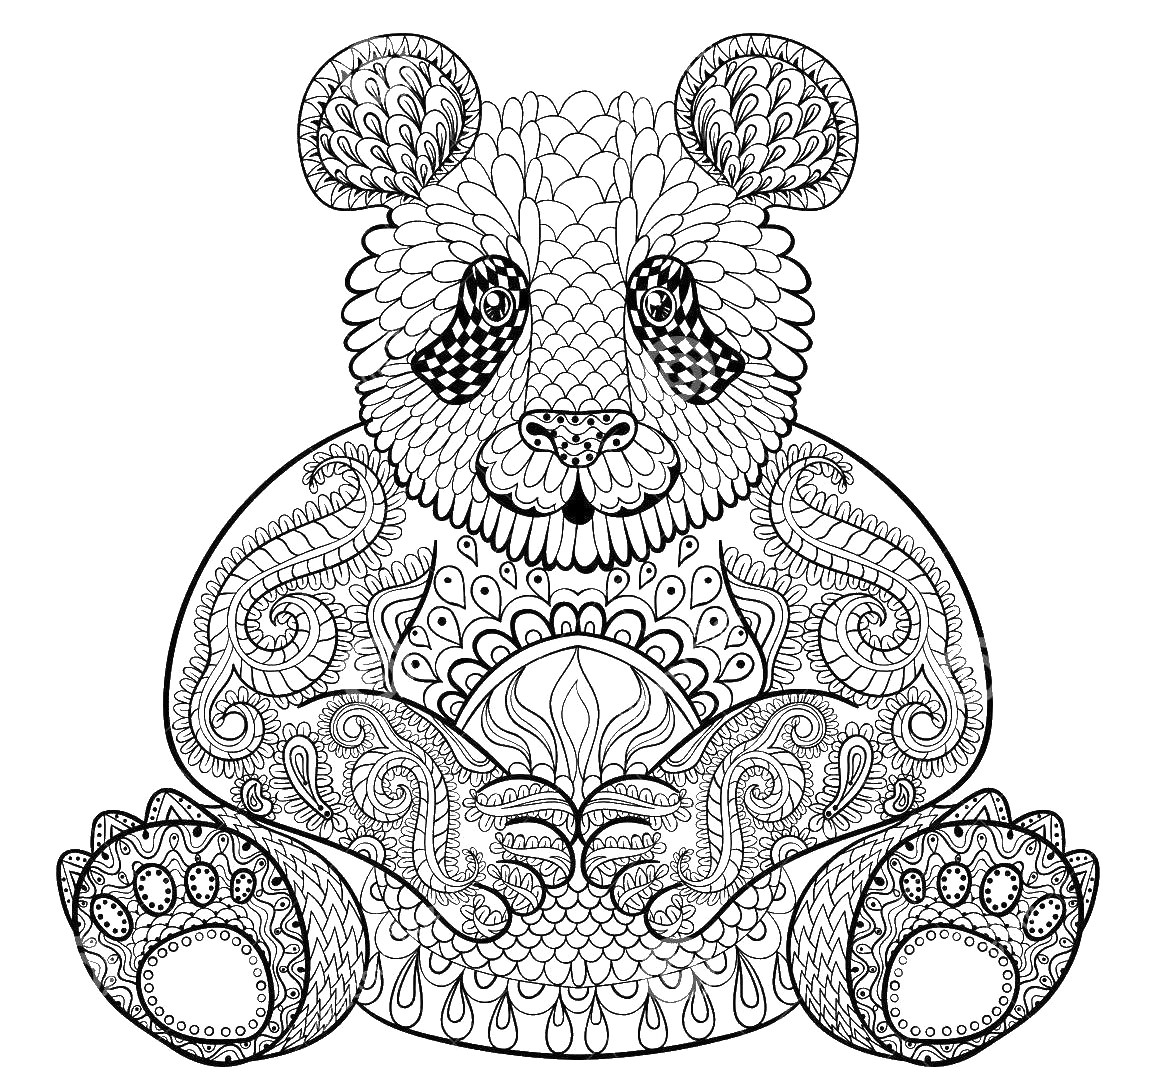 Coloring Pages Of Animals Hard Coloring Pages Marvelous Coloring Pages Hard Animals Adult For